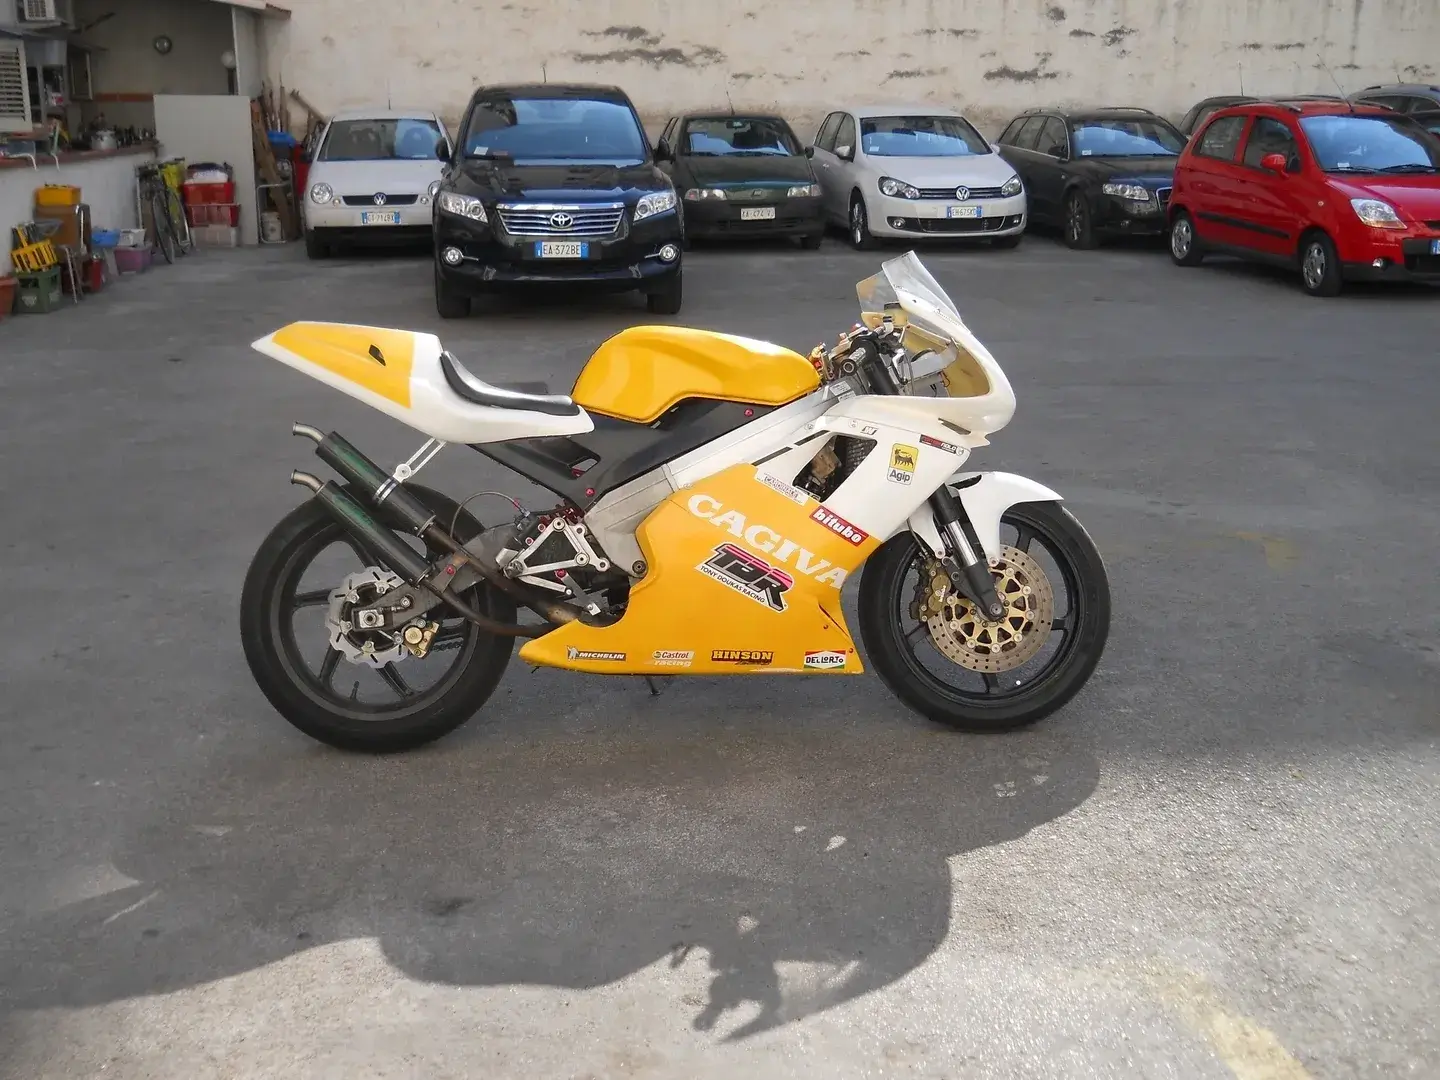 A yellow and white motorcycle parked in the parking lot.